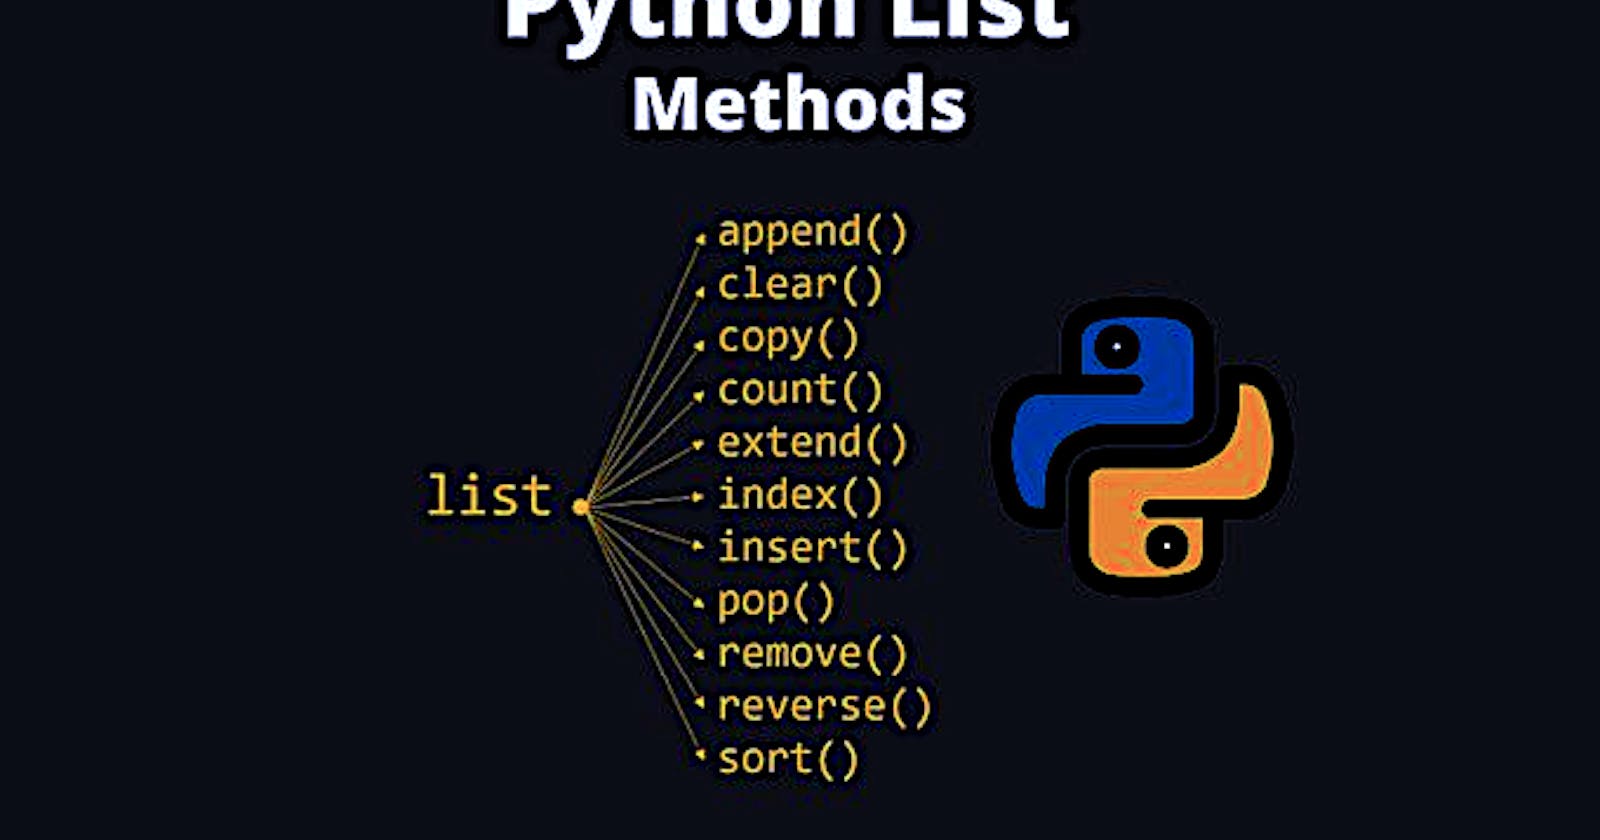 Python lists and it's essential functions